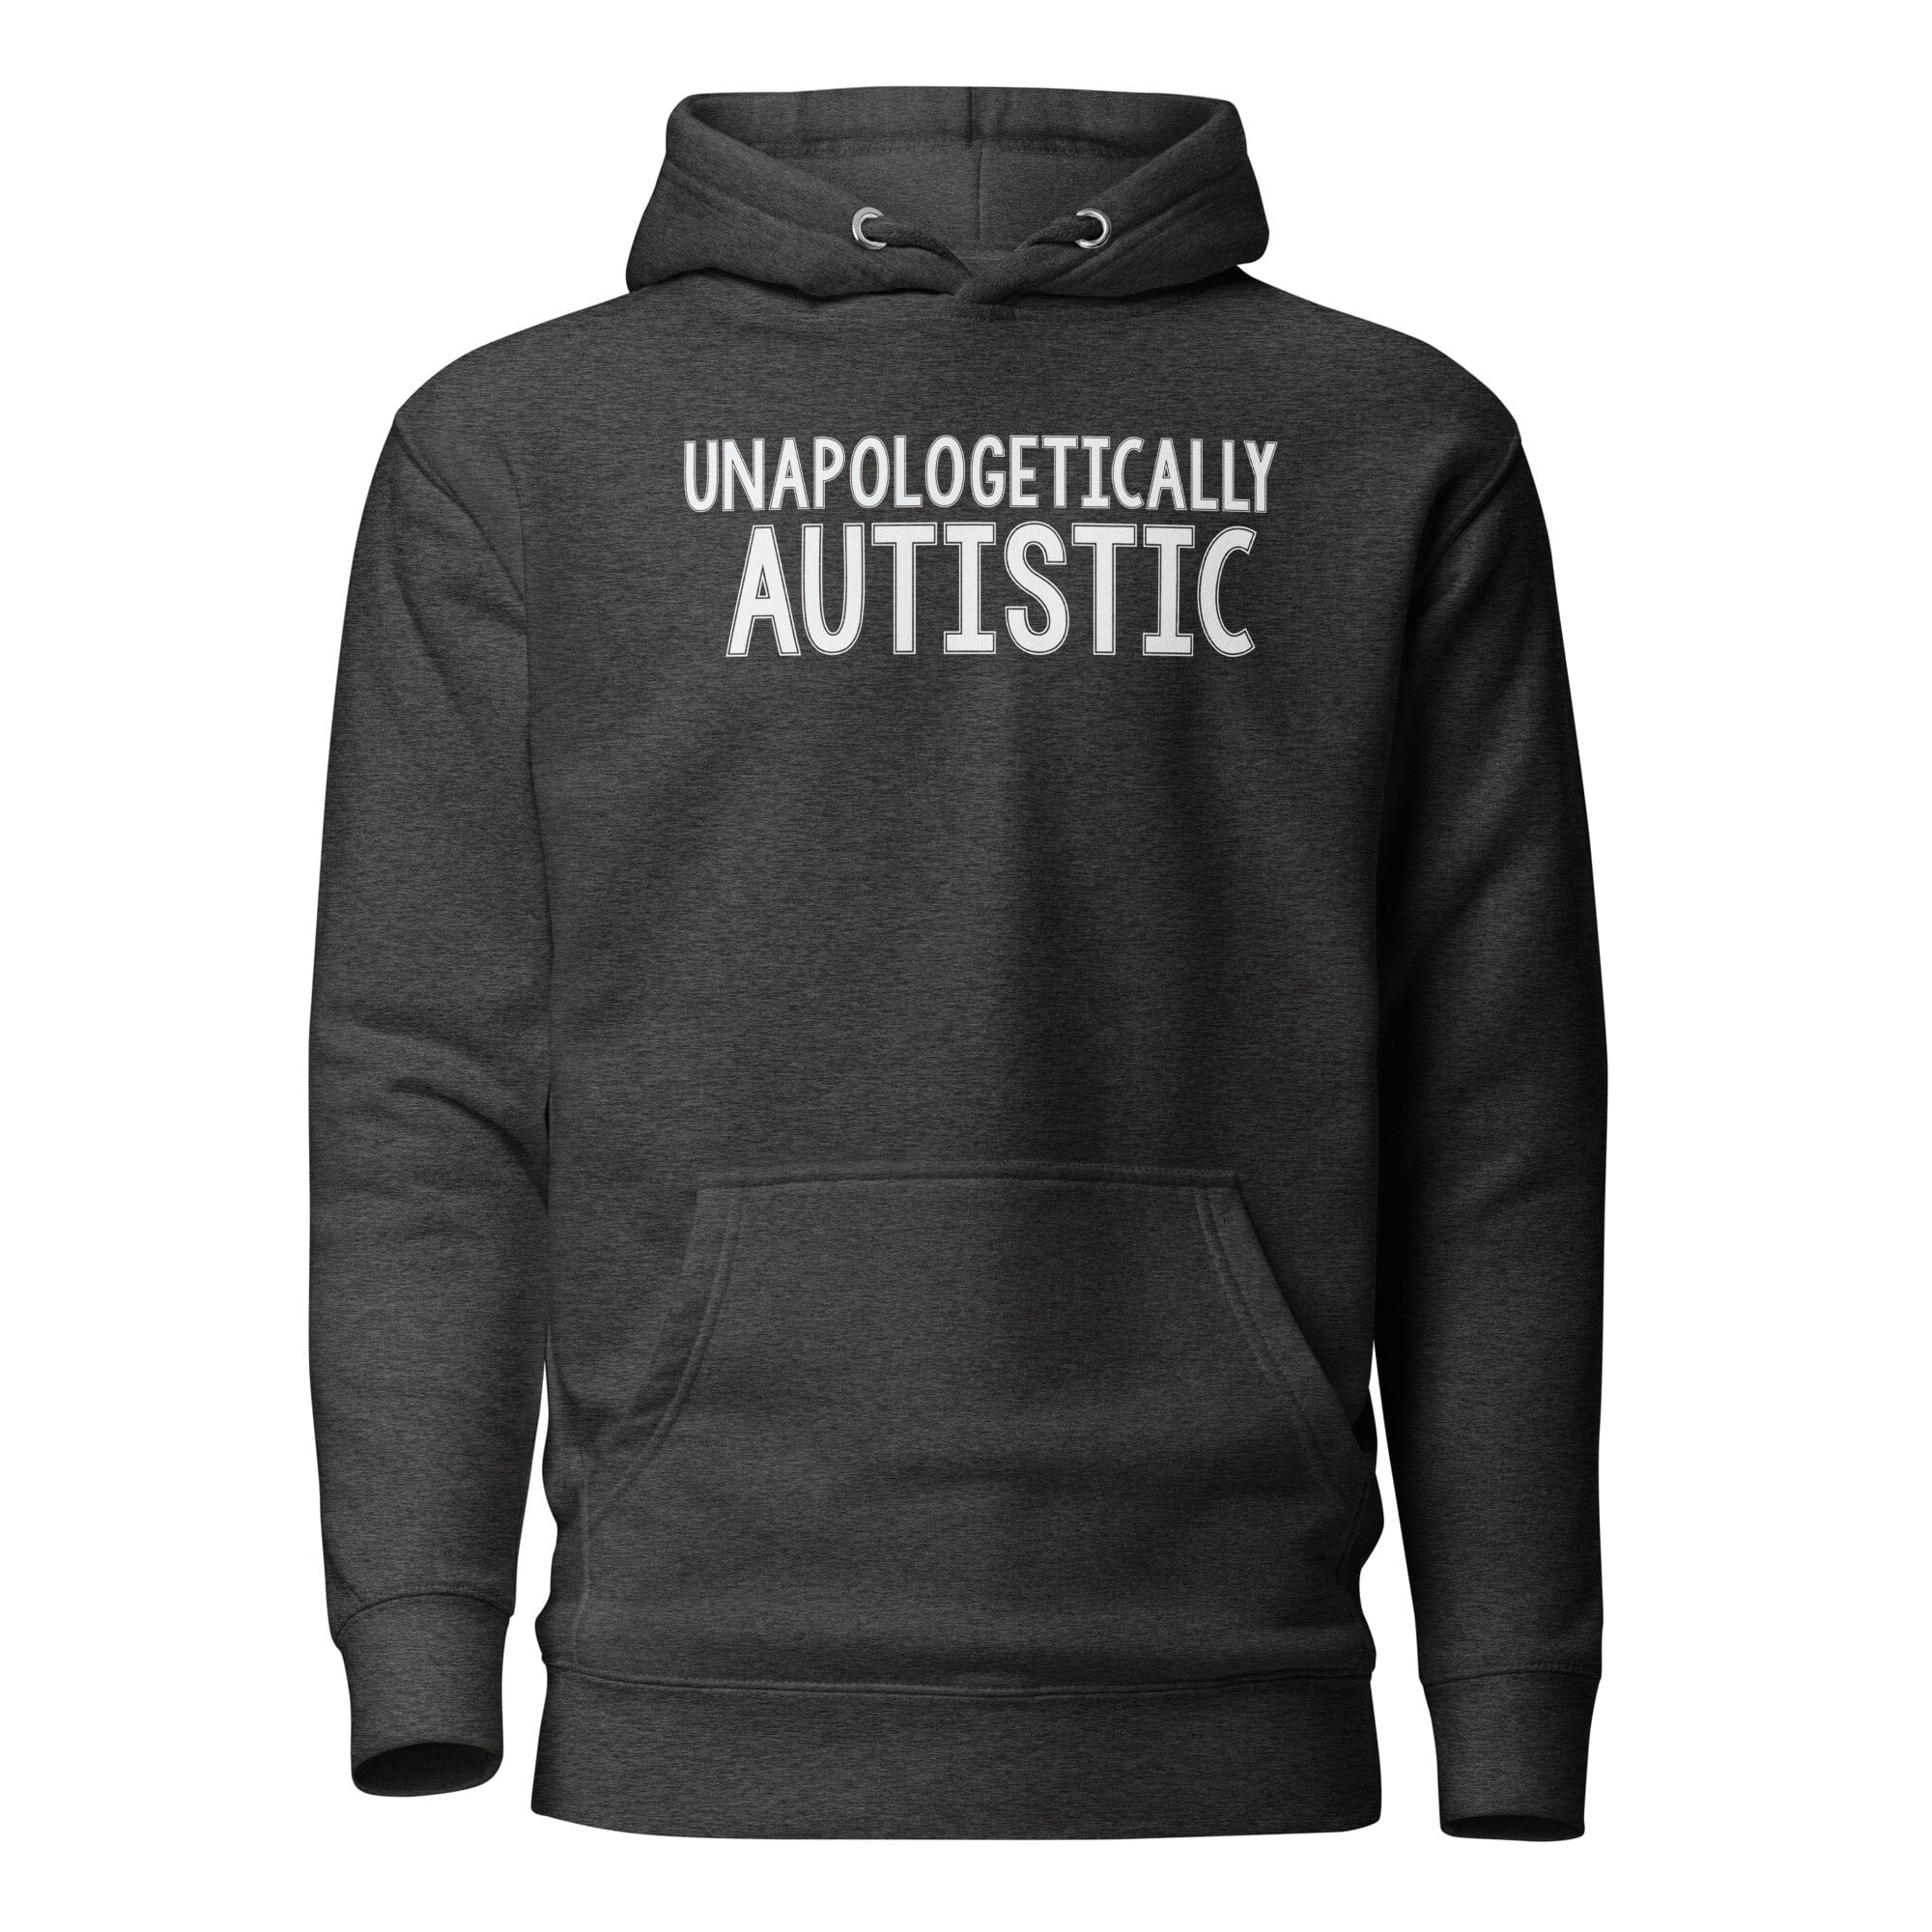 Unapologetically Autistic Unisex Hoodie The Autistic Innovator Charcoal Heather S 